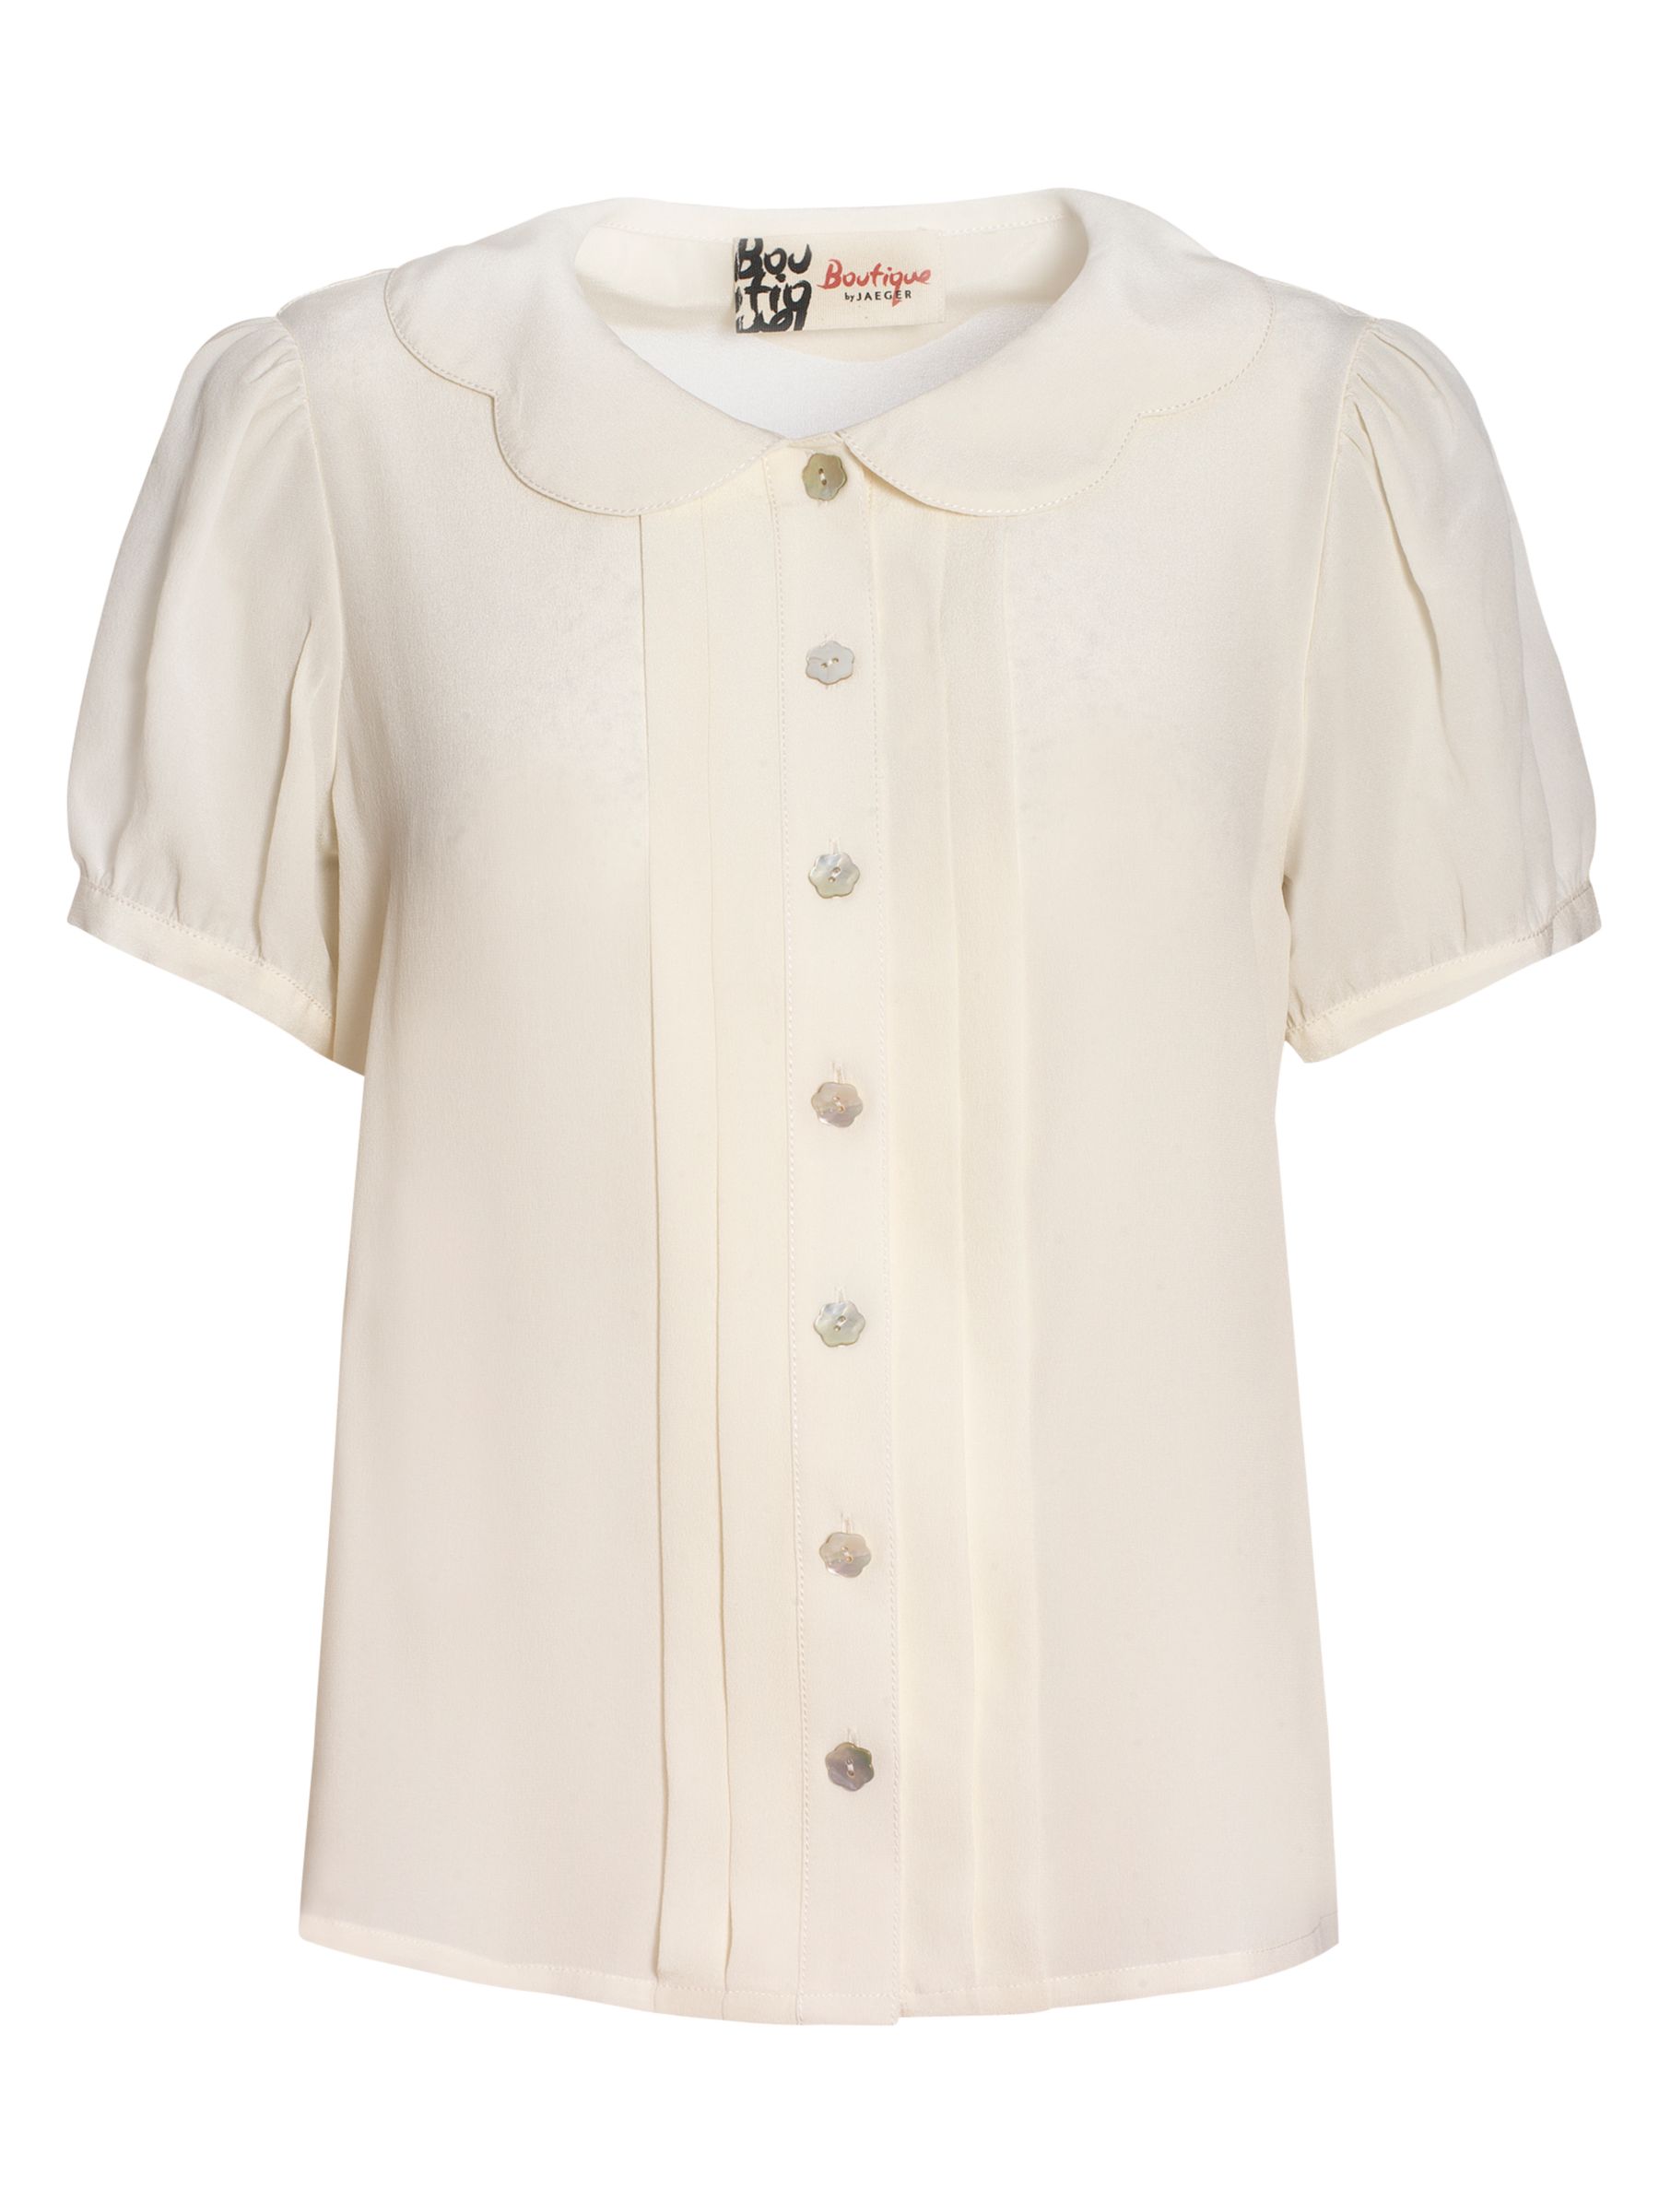 Boutique by Jaeger Scalloped Collar Silk Blouse,